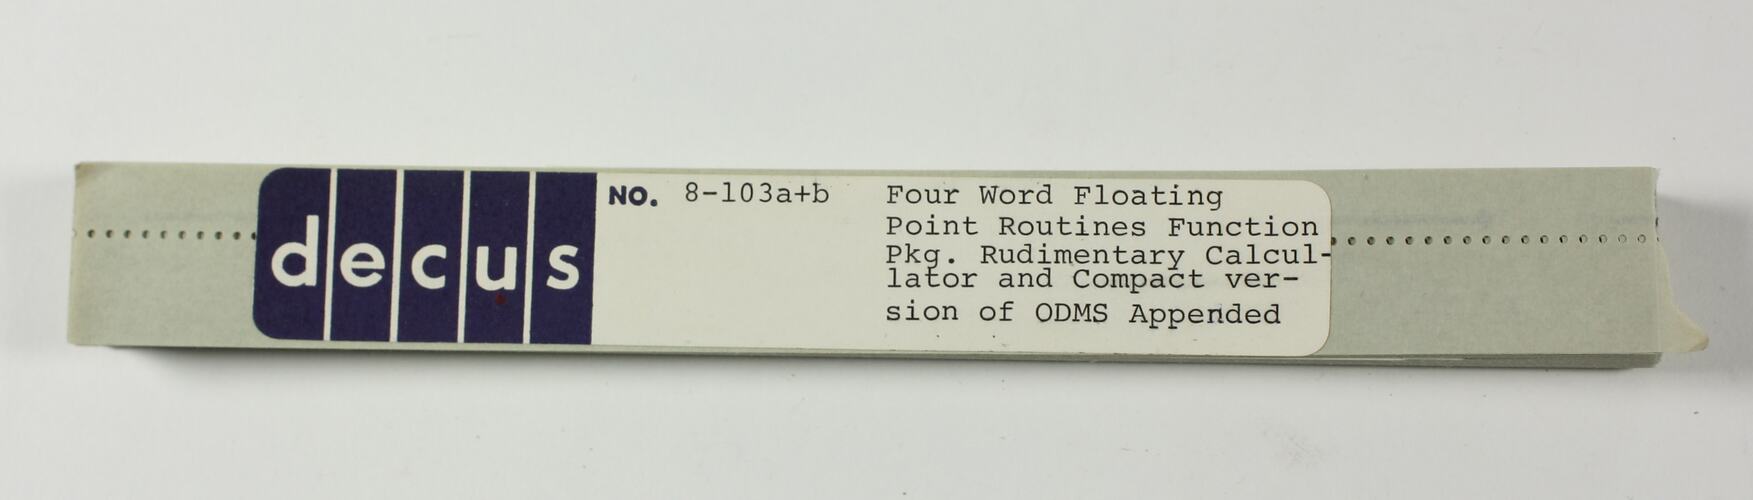 Paper Tape - DECUS, '8-103a+b Four Word Floating Point Routines Function Pkg. Rudimentary Calculator and Compact version of ODMS Appended'